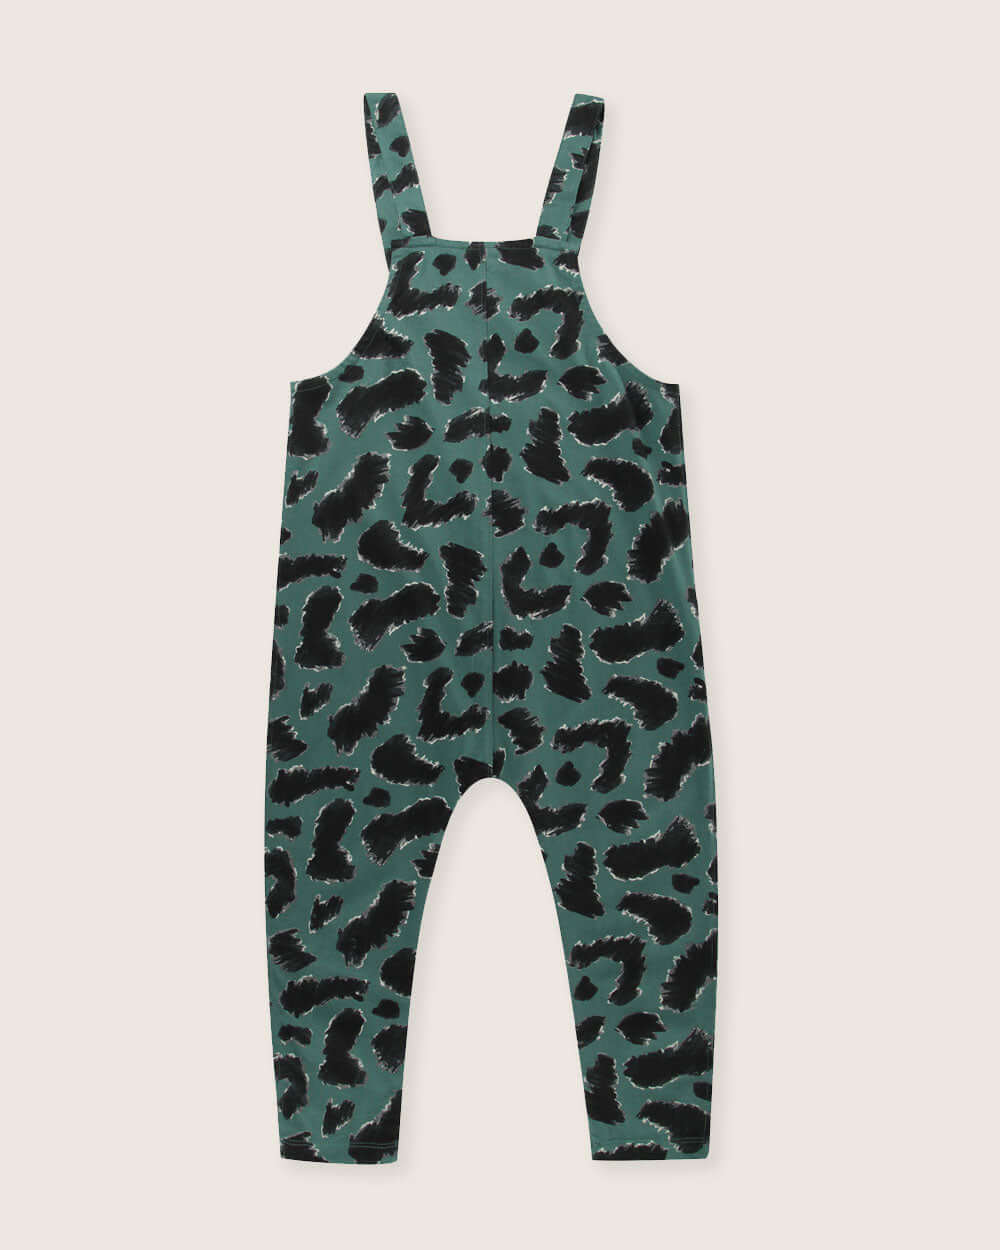 Dungarees for kids